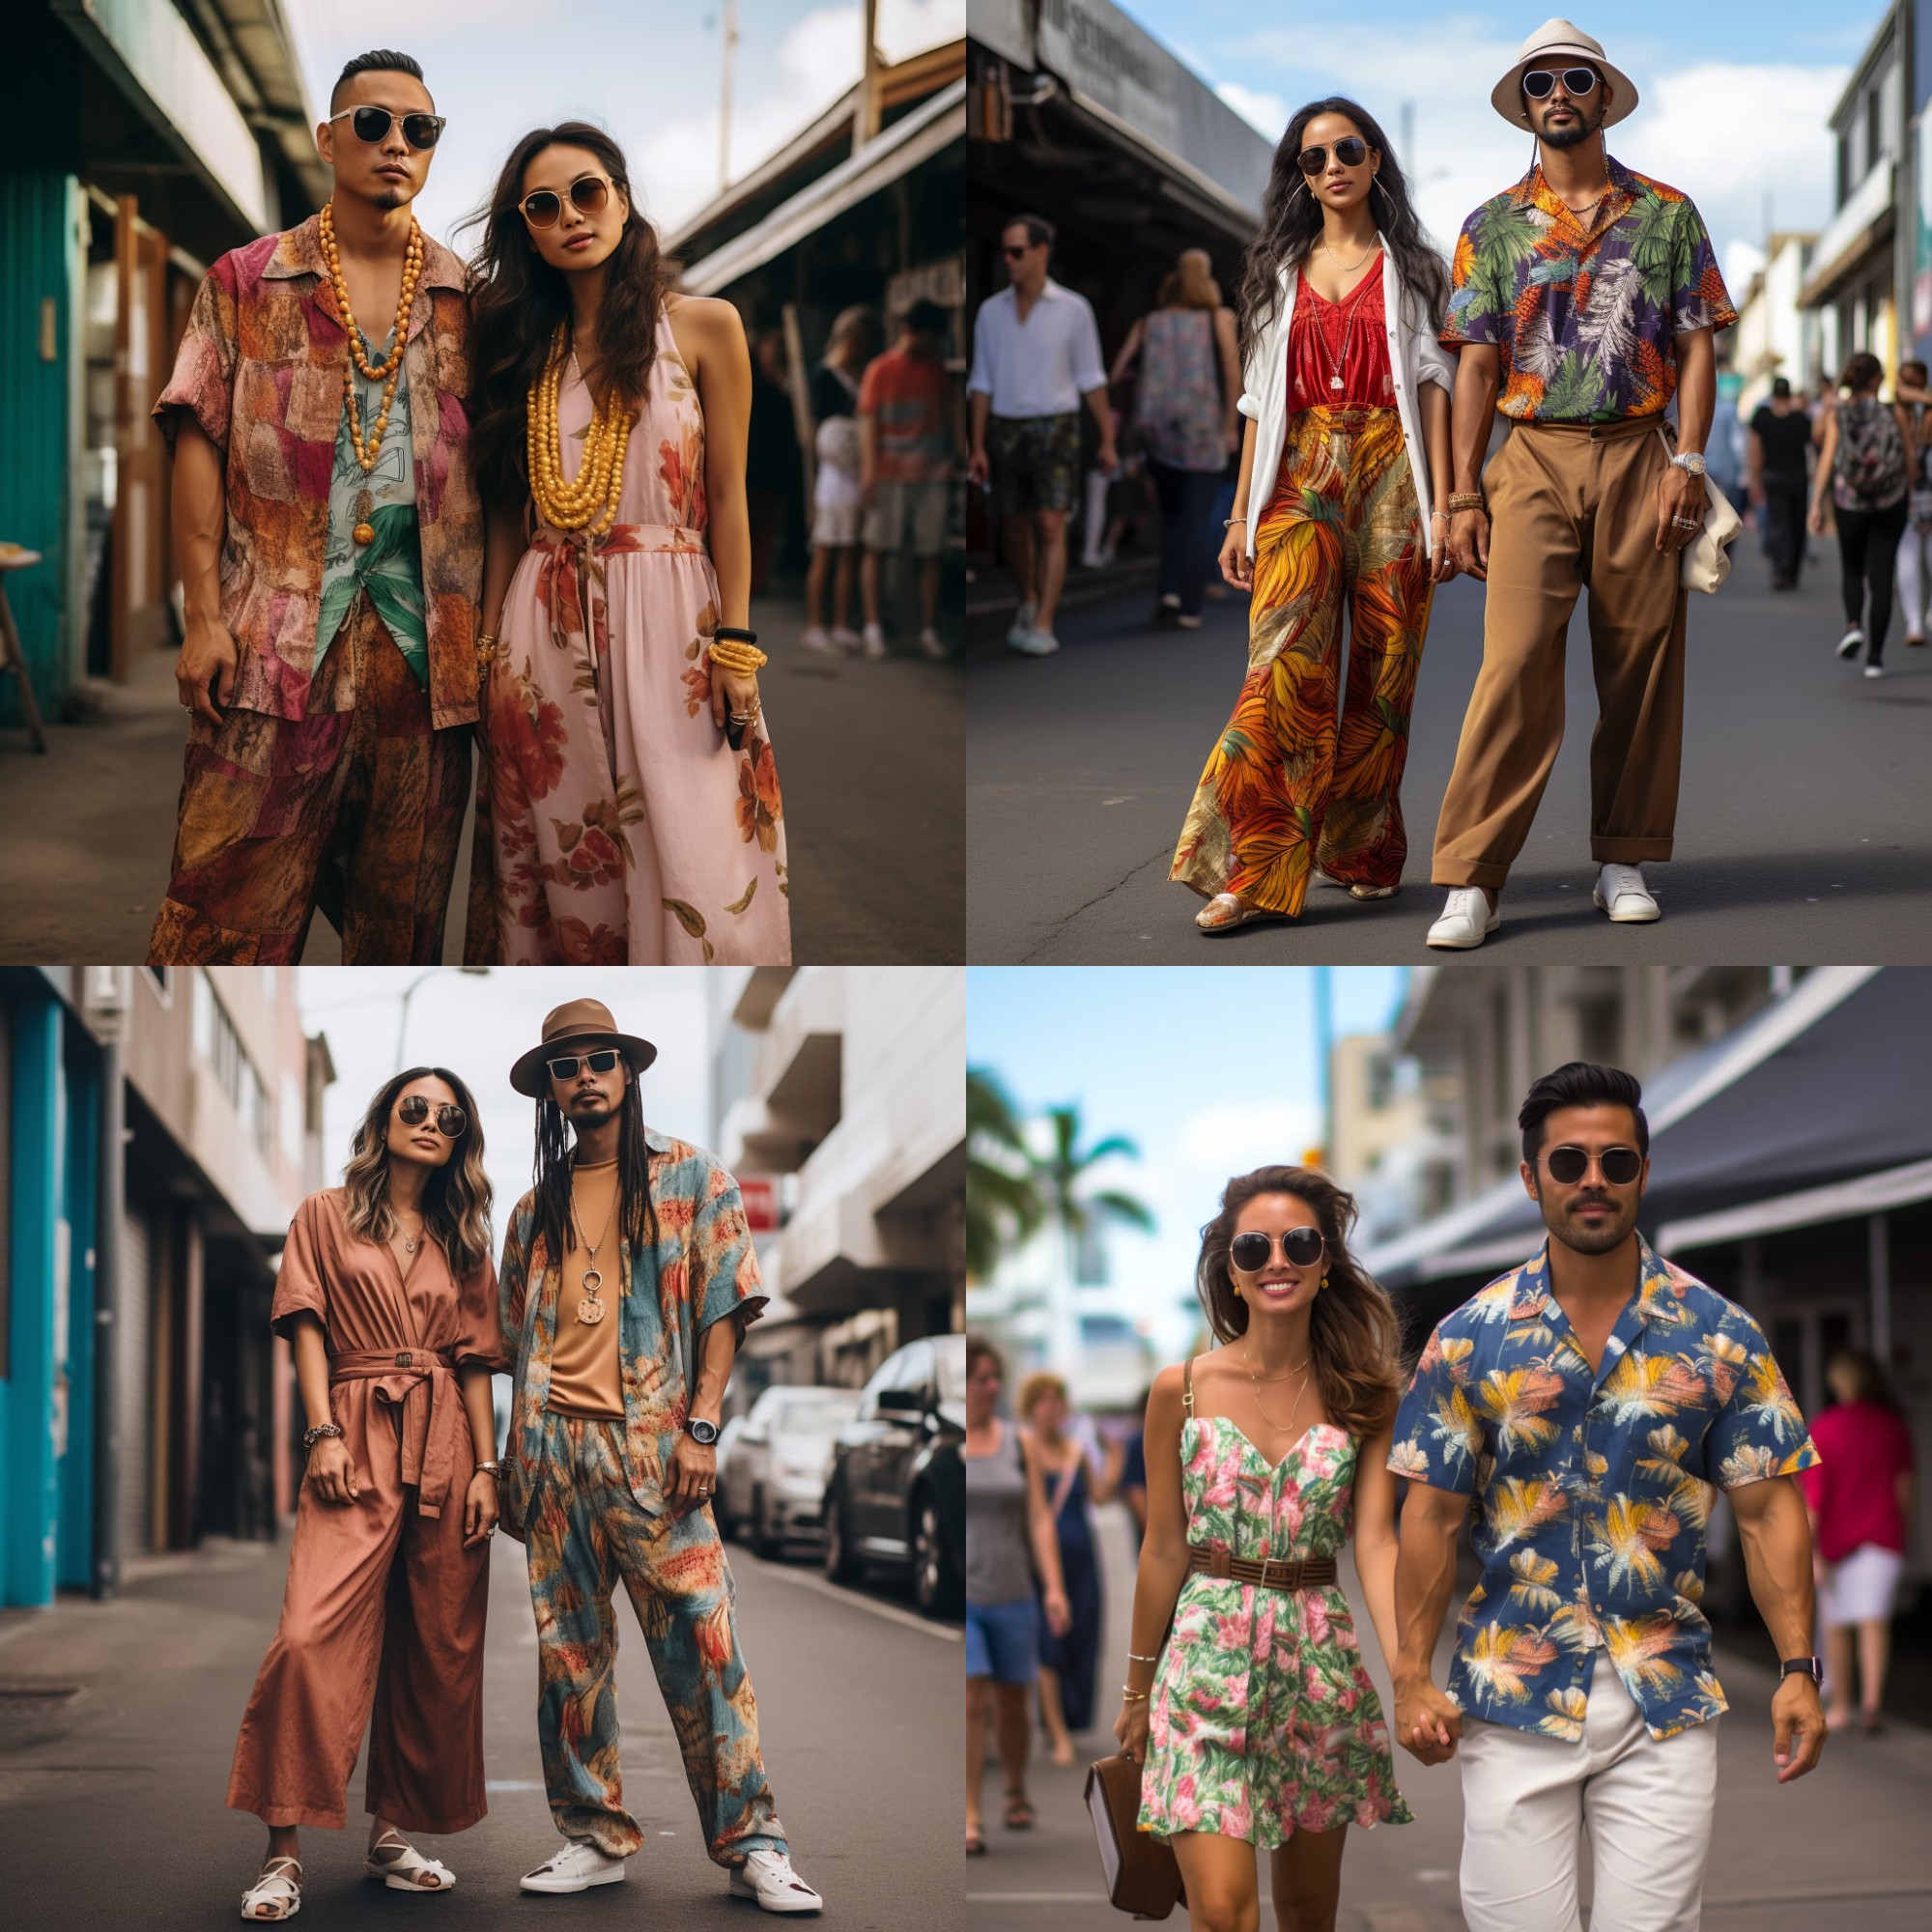 AI curated images of the average fashion style of individuals in Hawaii